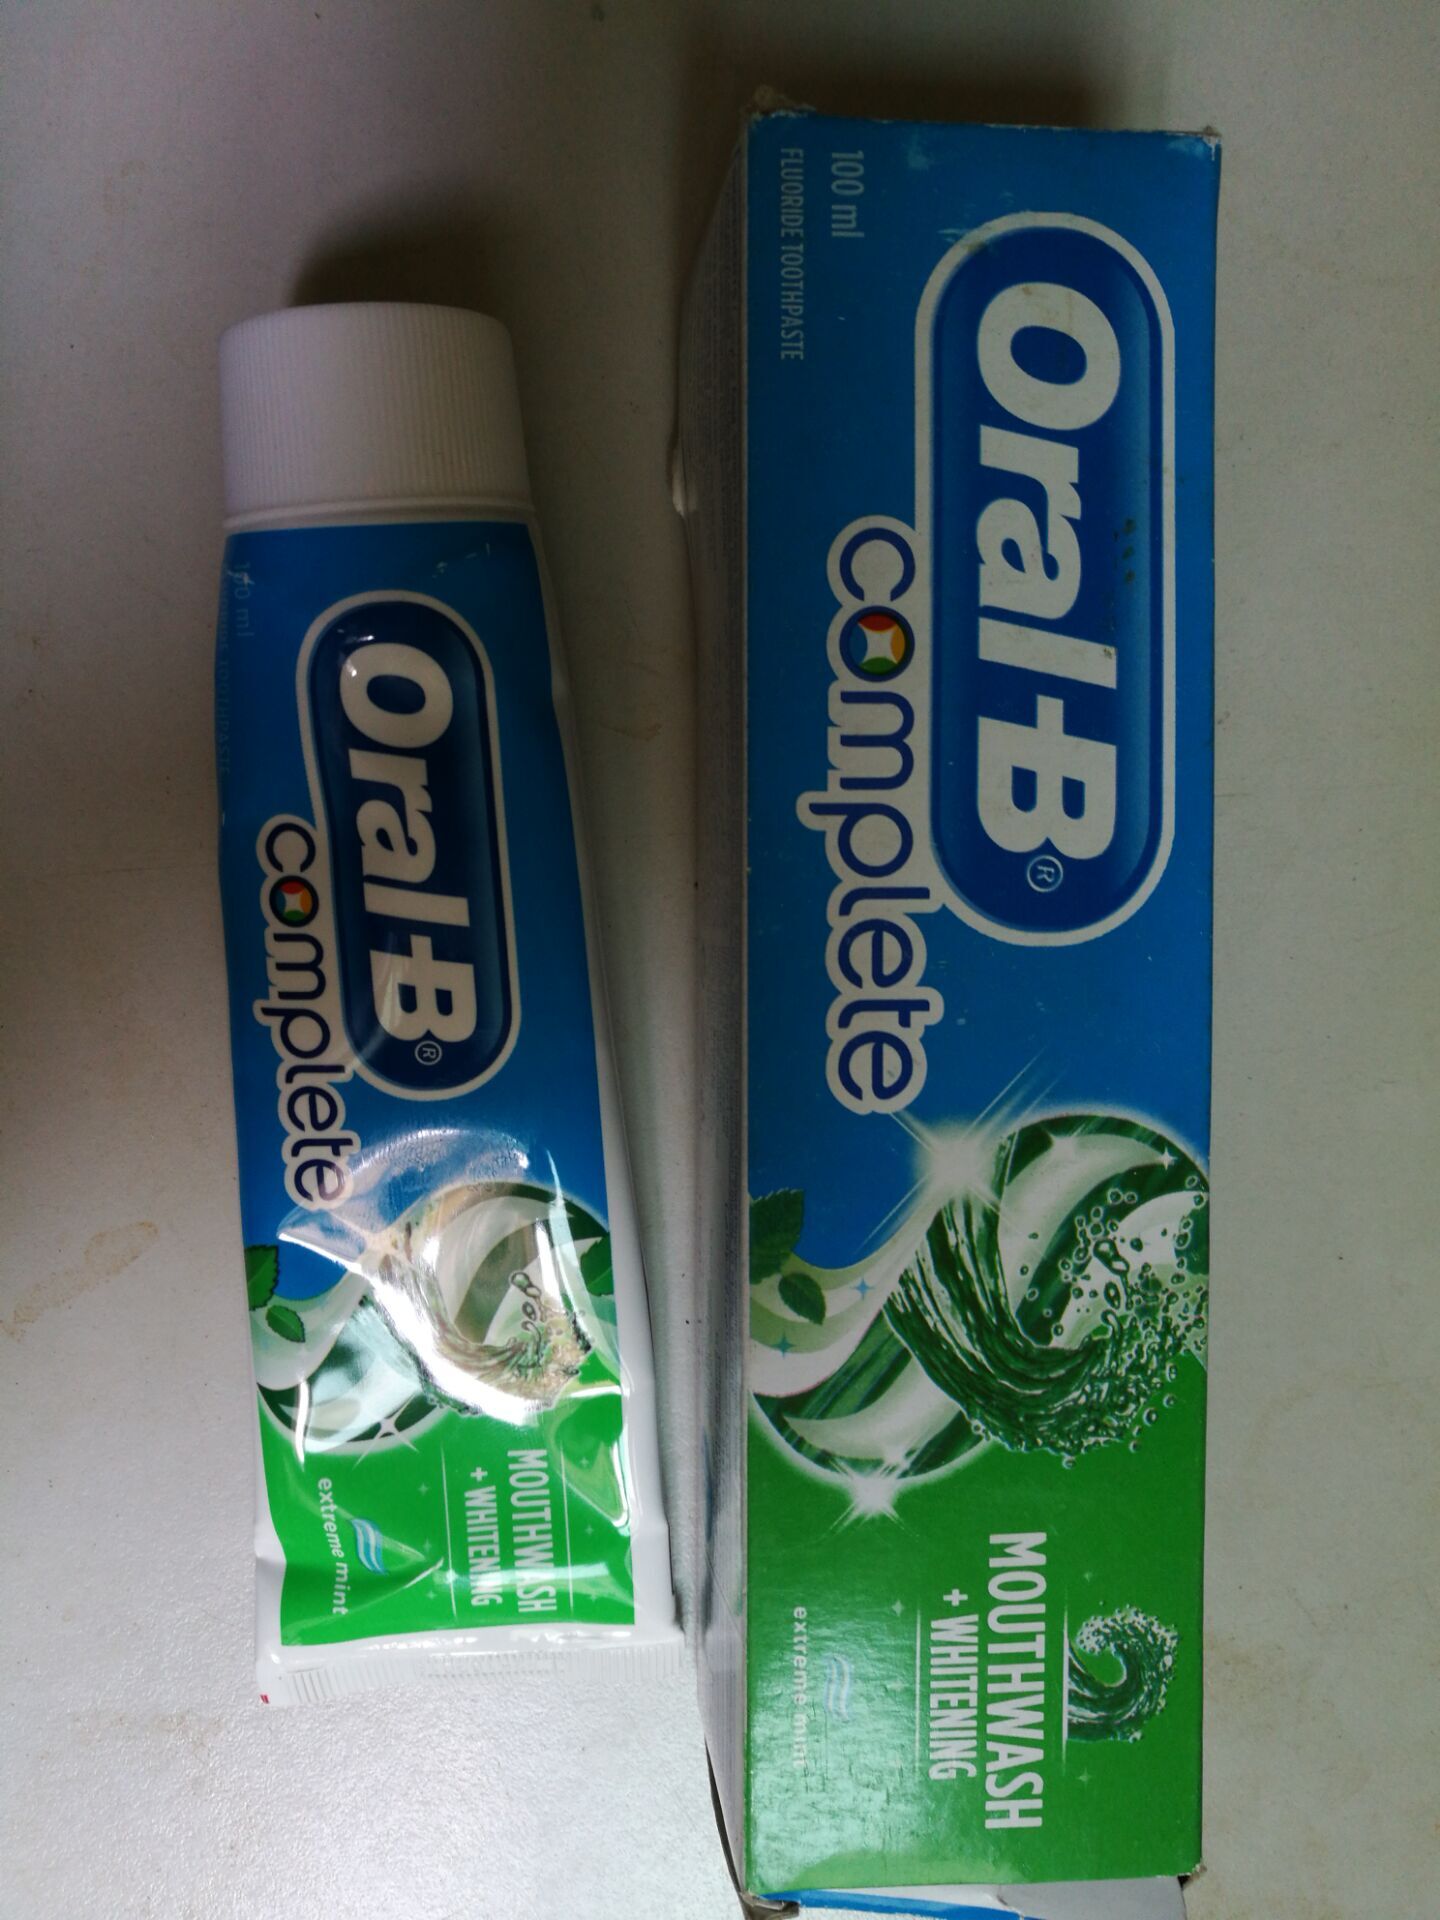 oral b toothpaste